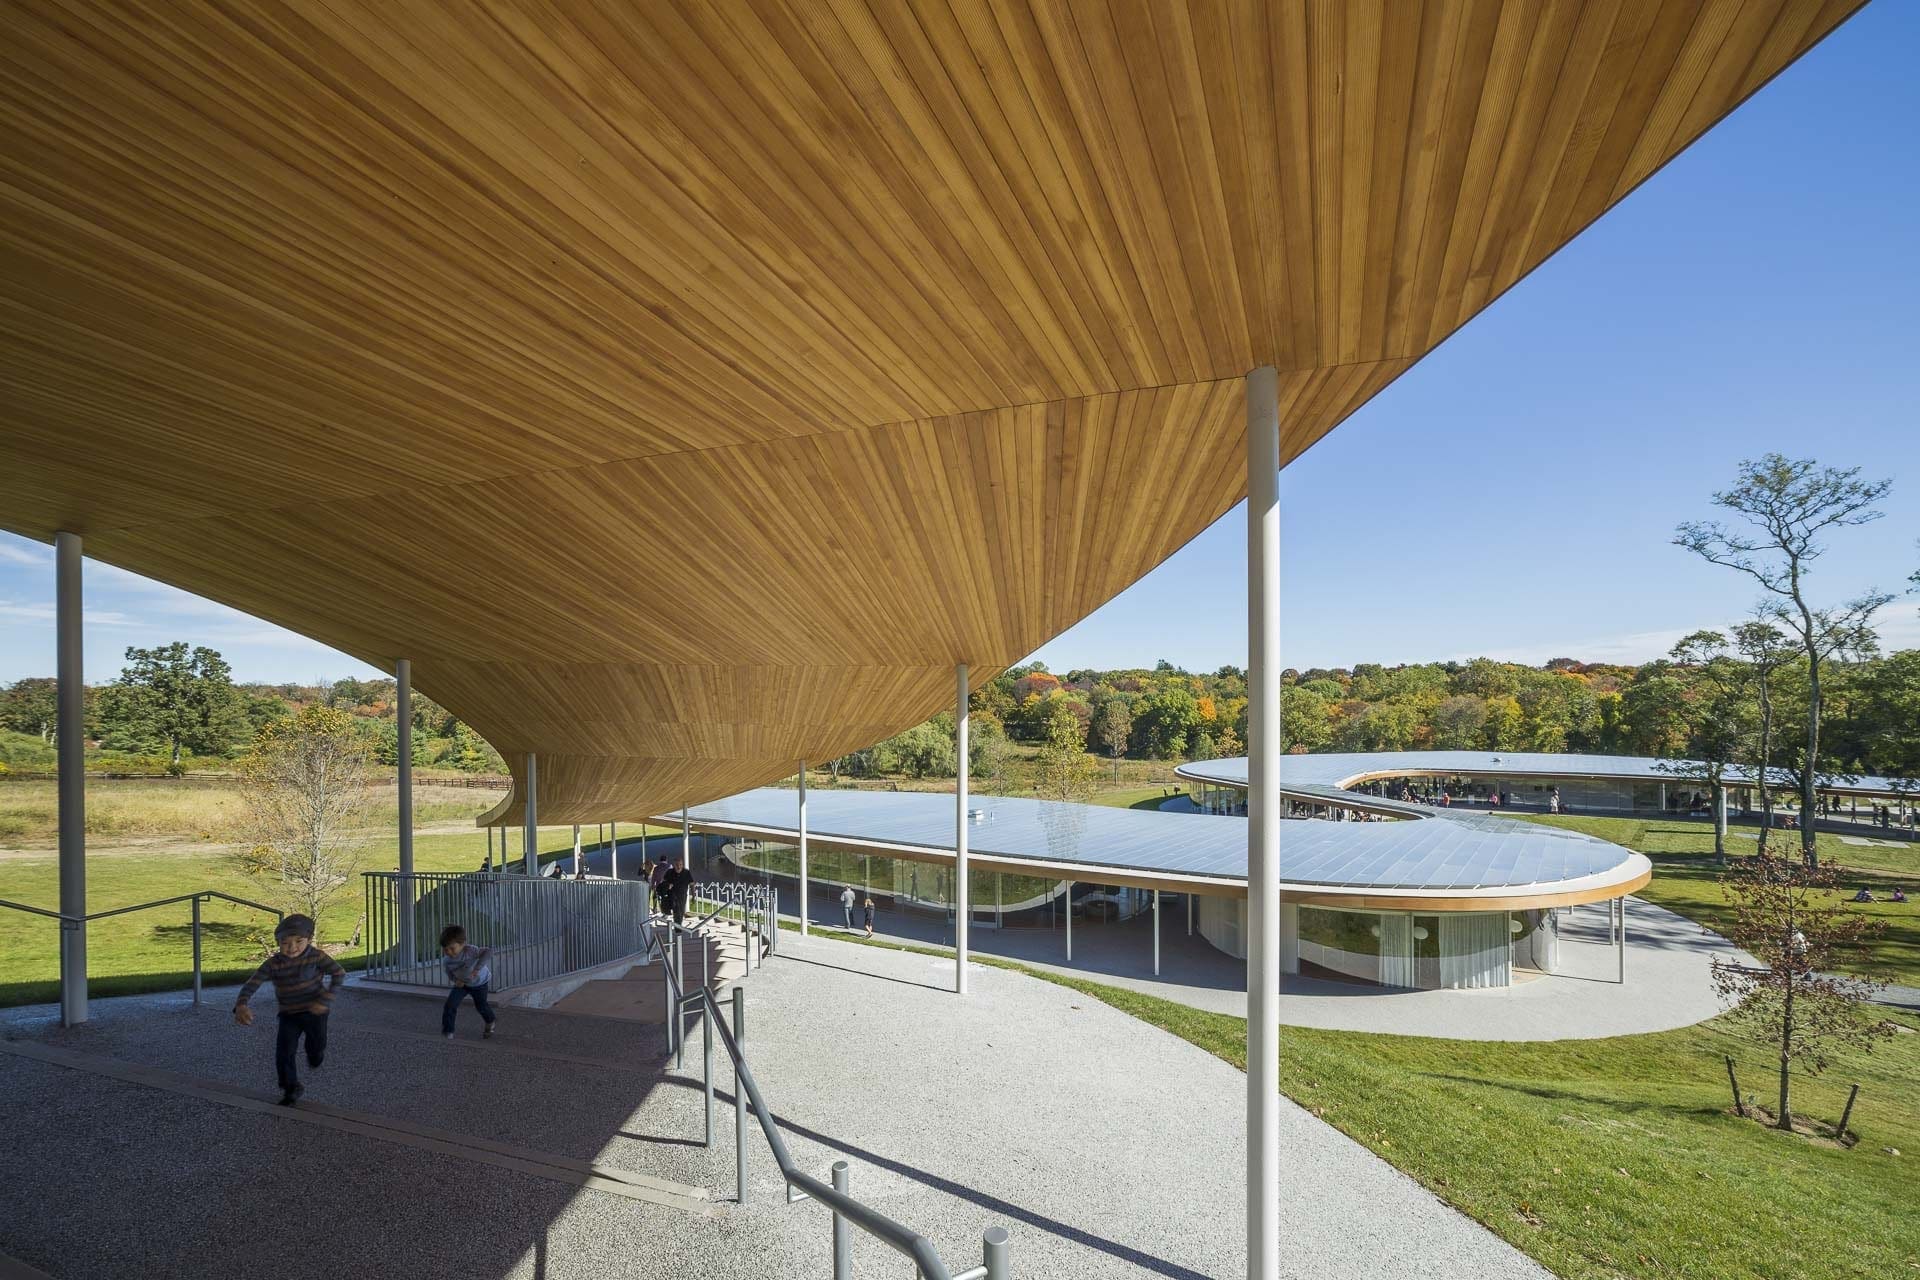 Wood panel ceiling provides a canopy for The River at Grace Farms